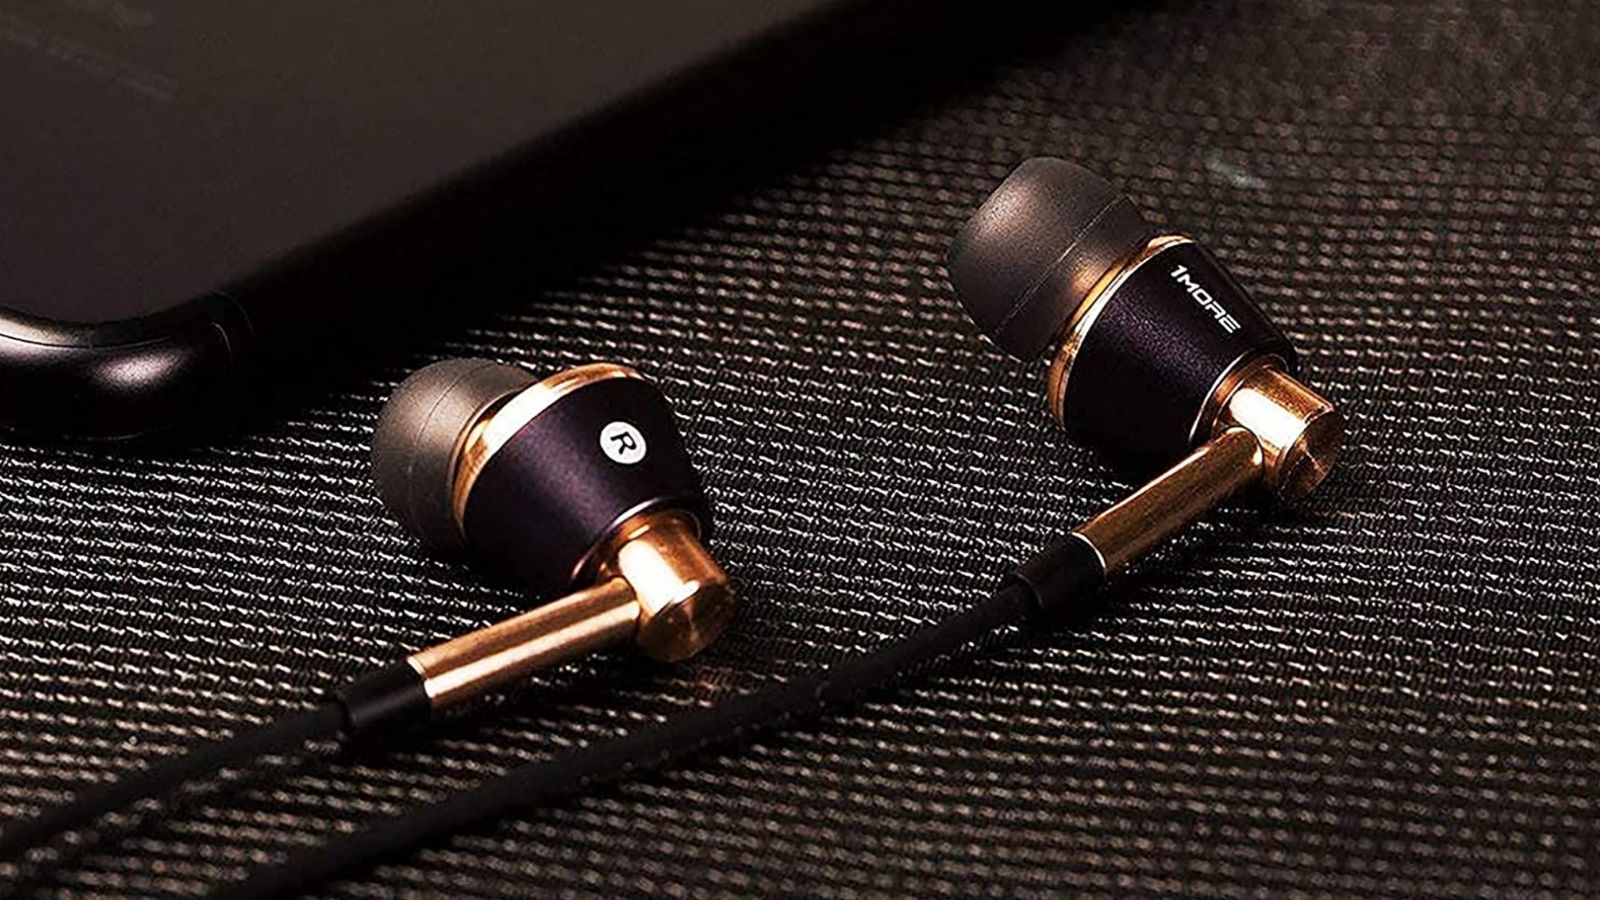 A pair of gold and black wired headphones lie side by side